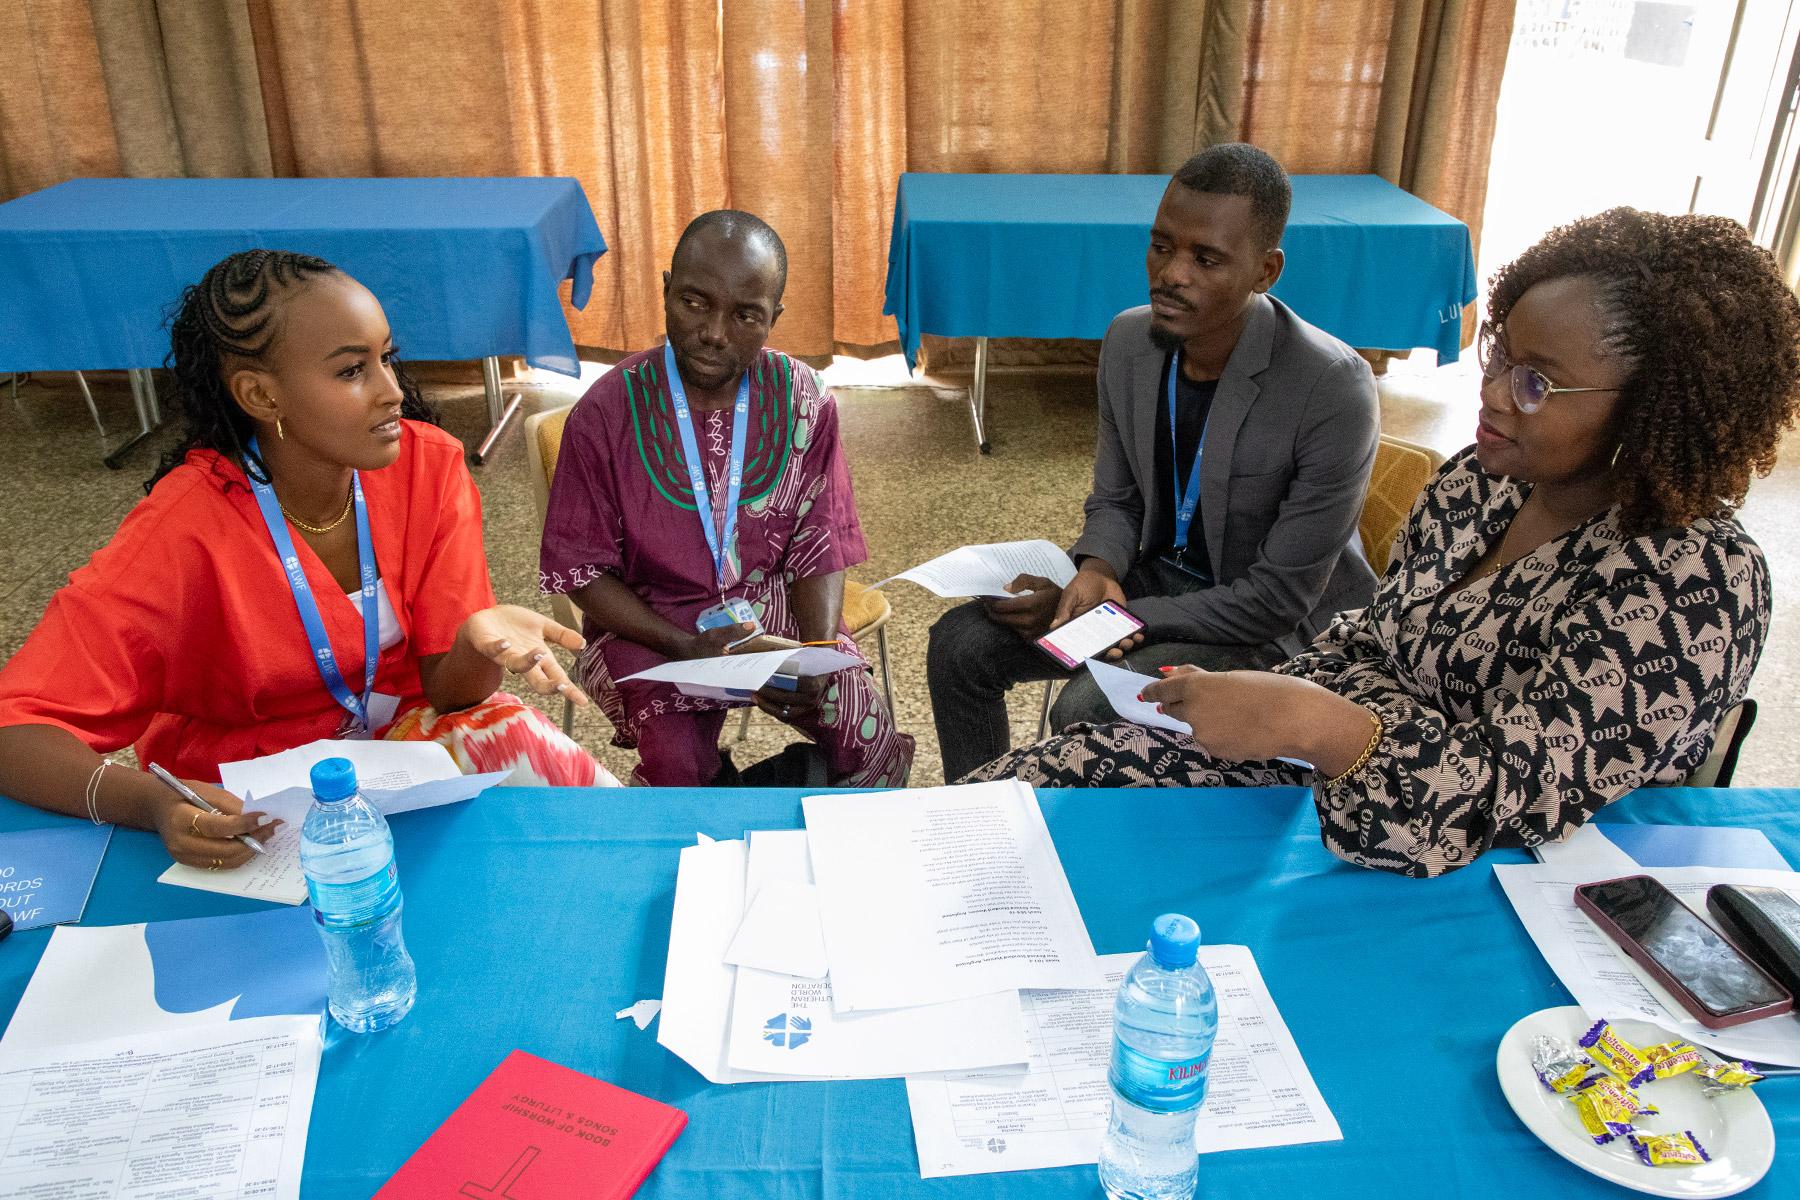 From left to right: Ms Phiona Uwase (Lutheran Church of Rwanda), Mr Aoudou Michael (Evangelical Lutheran Church of the Central African Republic), Mr Antonio Lembranca (Evangelical Lutheran Church in Mozambique) and Ms Pendo Mahoo (ELCT) sharing their experiences